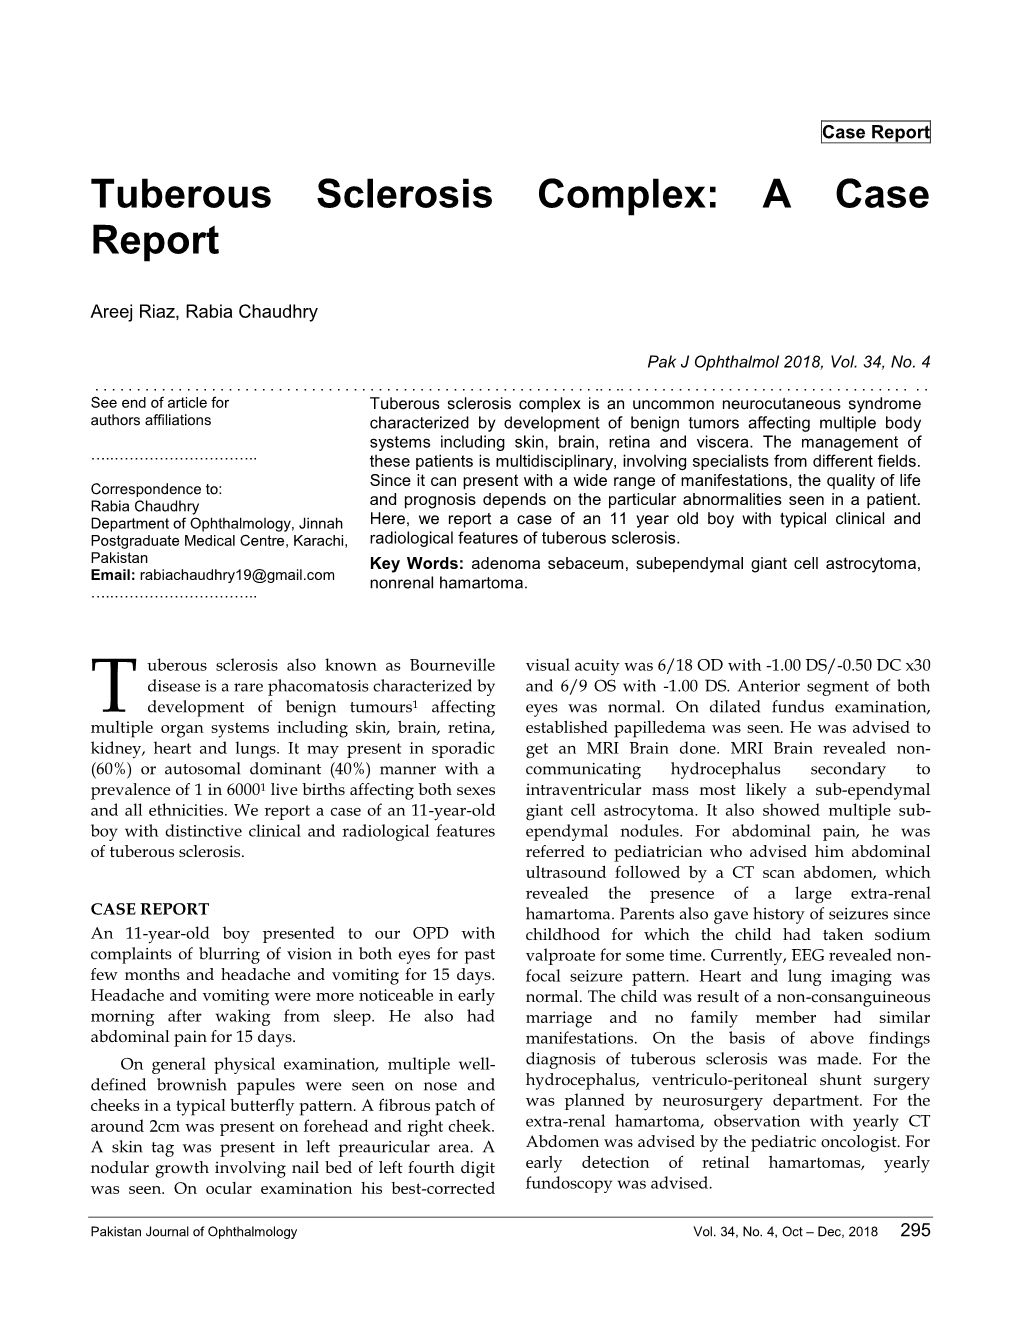 Tuberous Sclerosis Complex: a Case Report